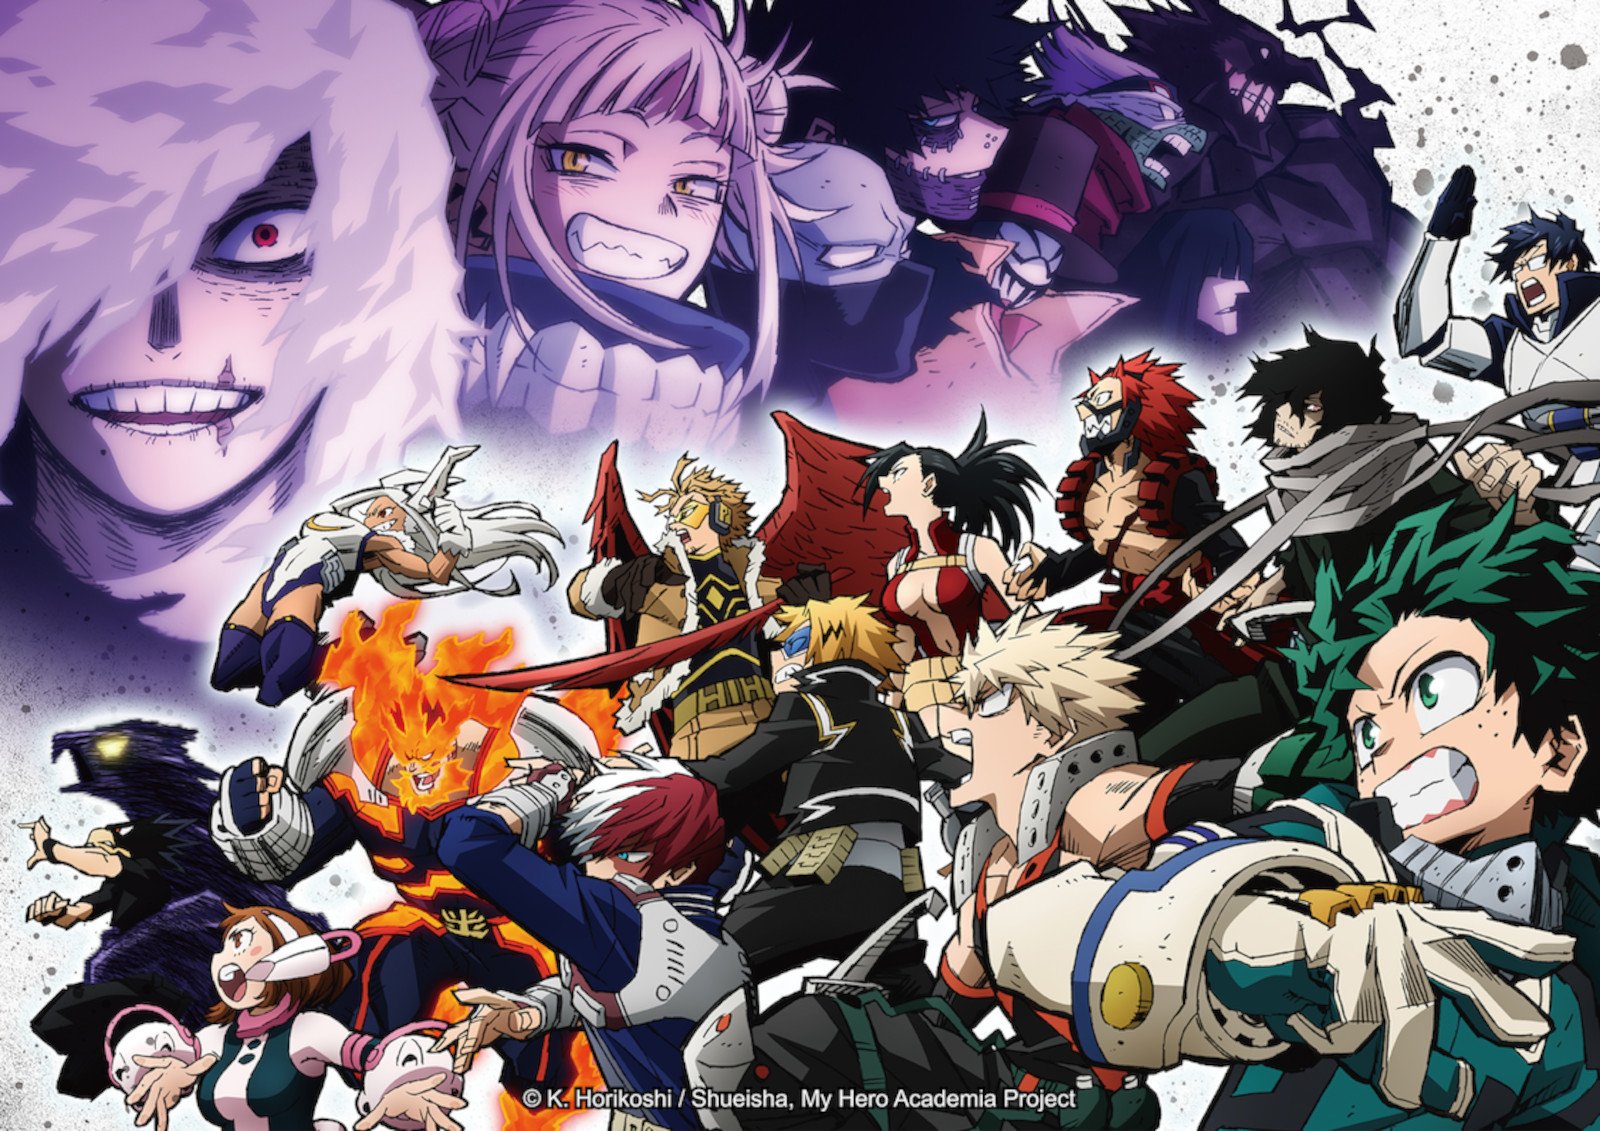 Key art for 'My Hero Academia' Season 6 for our preview of episode 11. It features the Pro Heroes diving into battle and the League of Villains hovering over them.